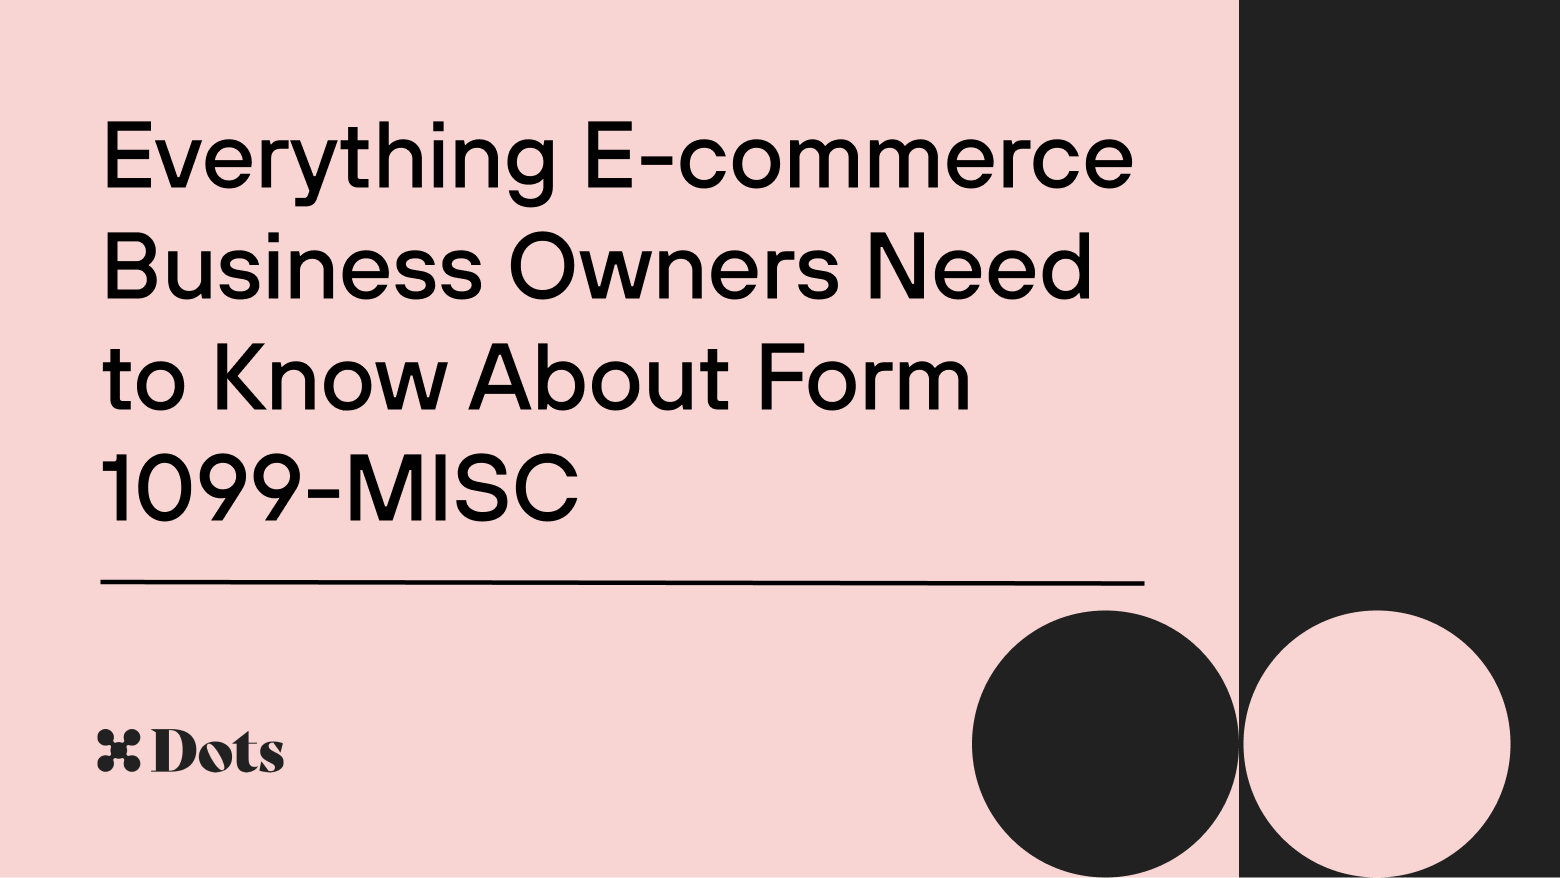 Everything E-commerce Business Owners Need to Know About Form 1099-MISC - Dots